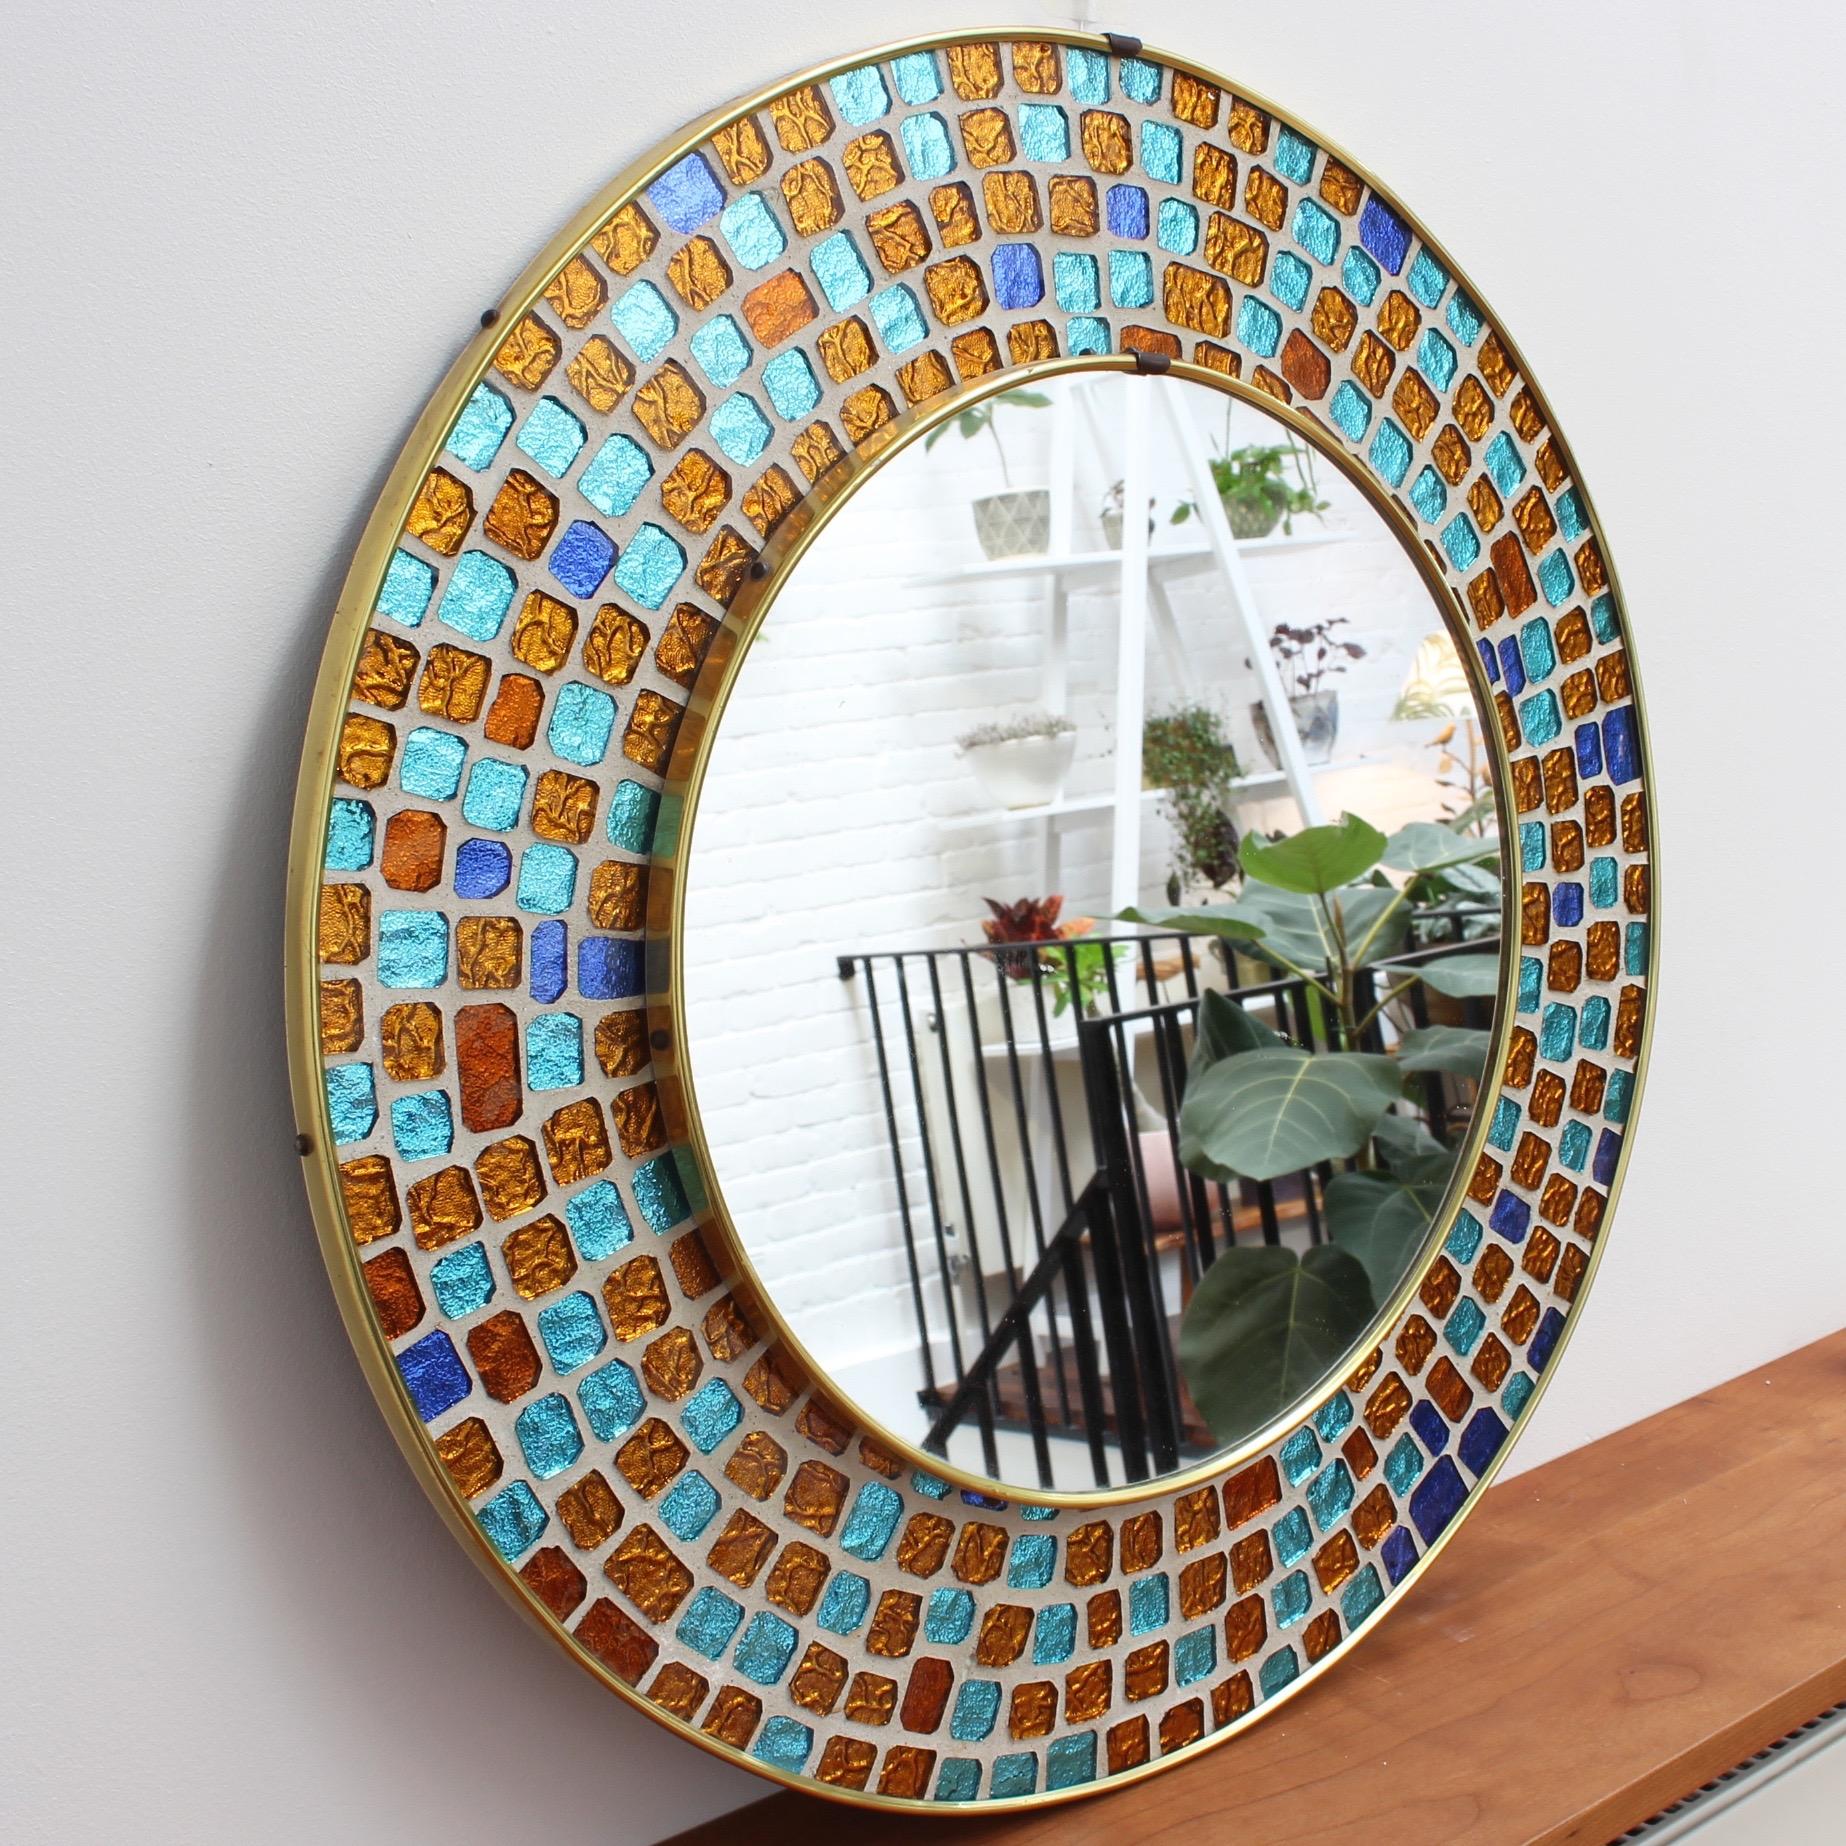 Resplendent midcentury circular brass wall mirror with colorful mosaic surround. Similar in style to Antoni Gaudí's 'Trencadís' technique involving hand-cut-glass tiles in different colors although these are uniform in shape. Spanish origin, circa